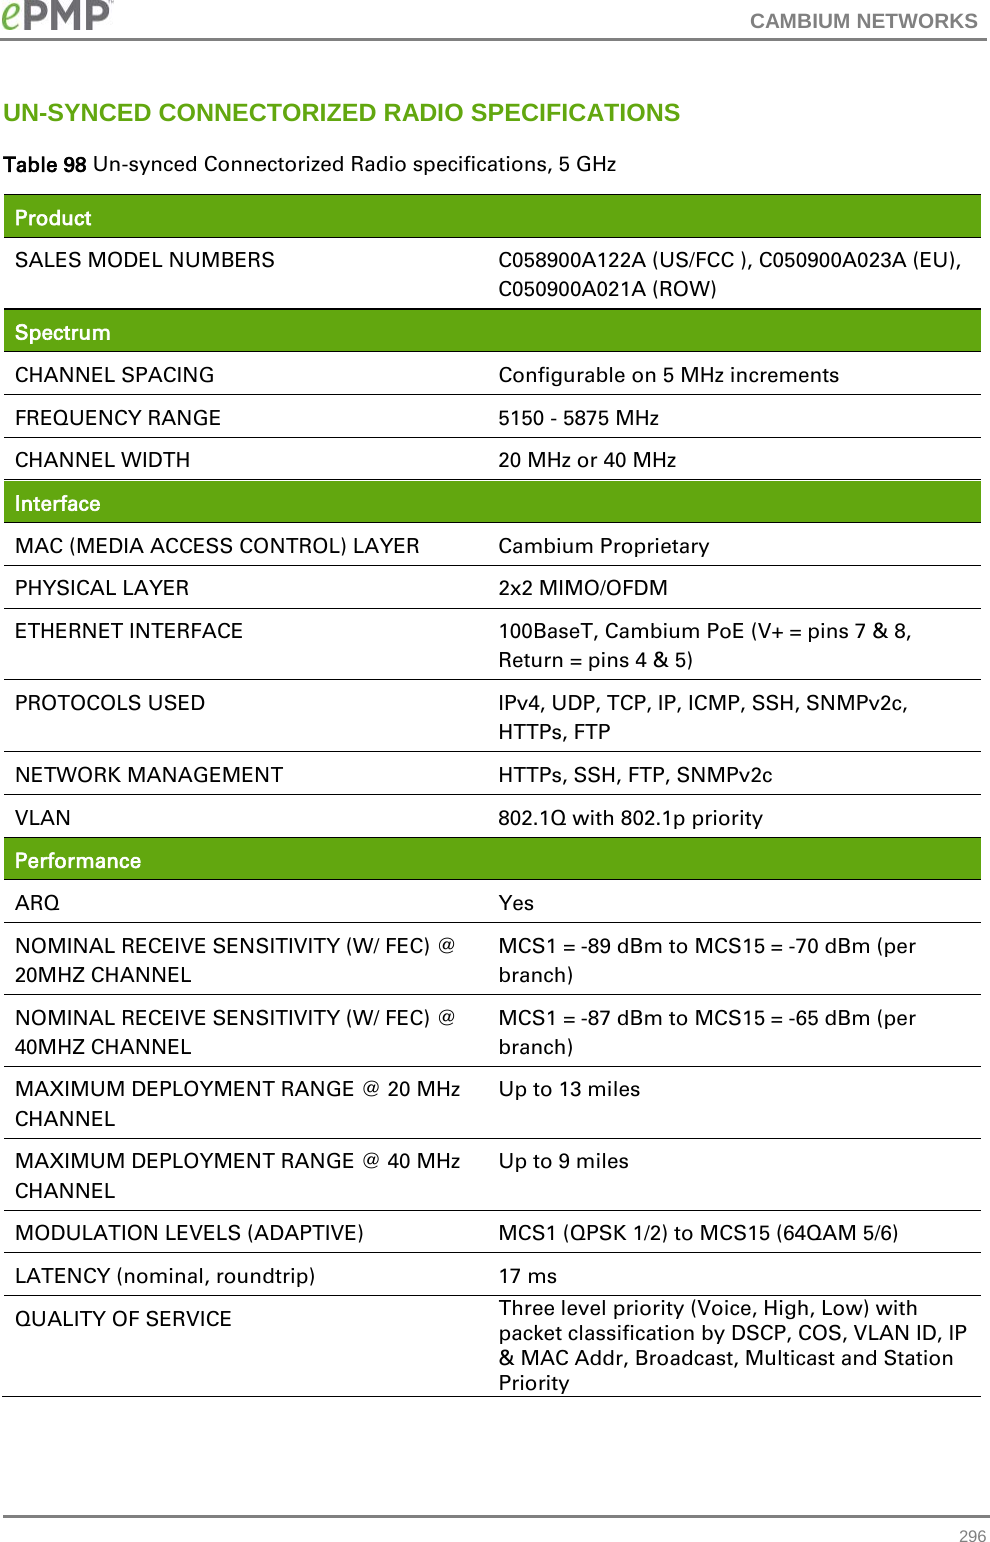 CAMBIUM NETWORKS  UN-SYNCED CONNECTORIZED RADIO SPECIFICATIONS Table 98 Un-synced Connectorized Radio specifications, 5 GHz Product  SALES MODEL NUMBERS C058900A122A (US/FCC ), C050900A023A (EU), C050900A021A (ROW) Spectrum  CHANNEL SPACING Configurable on 5 MHz increments FREQUENCY RANGE 5150 - 5875 MHz CHANNEL WIDTH 20 MHz or 40 MHz Interface  MAC (MEDIA ACCESS CONTROL) LAYER Cambium Proprietary PHYSICAL LAYER 2x2 MIMO/OFDM ETHERNET INTERFACE 100BaseT, Cambium PoE (V+ = pins 7 &amp; 8, Return = pins 4 &amp; 5) PROTOCOLS USED IPv4, UDP, TCP, IP, ICMP, SSH, SNMPv2c, HTTPs, FTP NETWORK MANAGEMENT HTTPs, SSH, FTP, SNMPv2c VLAN 802.1Q with 802.1p priority Performance  ARQ Yes NOMINAL RECEIVE SENSITIVITY (W/ FEC) @ 20MHZ CHANNEL MCS1 = -89 dBm to MCS15 = -70 dBm (per branch) NOMINAL RECEIVE SENSITIVITY (W/ FEC) @ 40MHZ CHANNEL MCS1 = -87 dBm to MCS15 = -65 dBm (per branch) MAXIMUM DEPLOYMENT RANGE @ 20 MHz CHANNEL Up to 13 miles MAXIMUM DEPLOYMENT RANGE @ 40 MHz CHANNEL Up to 9 miles MODULATION LEVELS (ADAPTIVE) MCS1 (QPSK 1/2) to MCS15 (64QAM 5/6) LATENCY (nominal, roundtrip) 17 ms QUALITY OF SERVICE Three level priority (Voice, High, Low) with packet classification by DSCP, COS, VLAN ID, IP &amp; MAC Addr, Broadcast, Multicast and Station Priority  296 